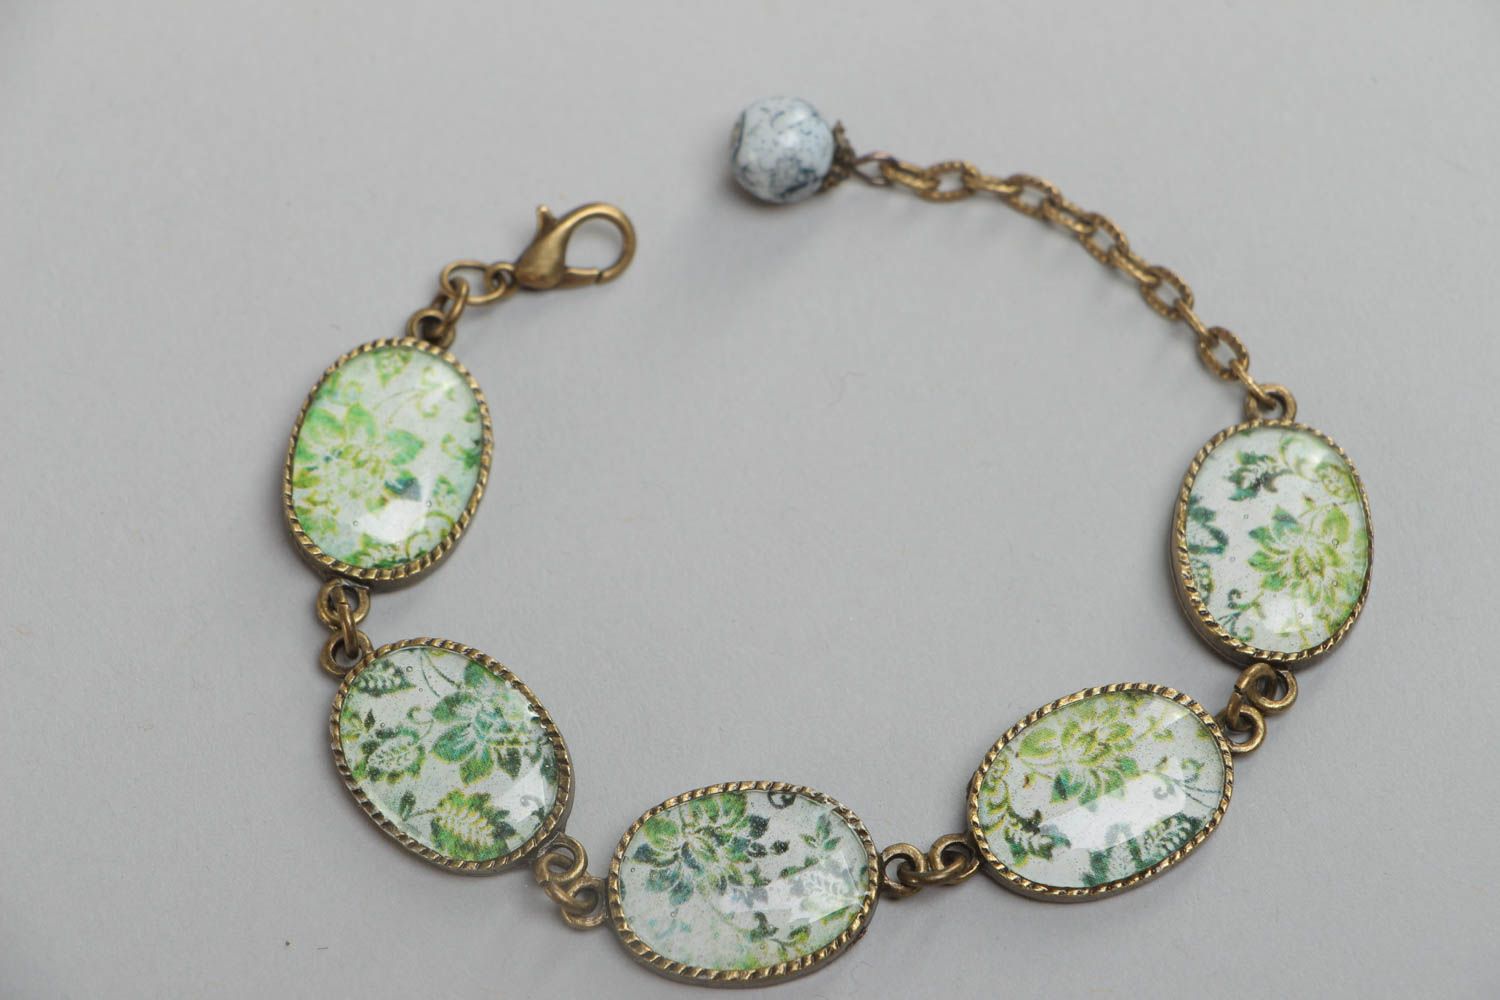 Handmade vintage bracelet made of glass glaze with metal fittings and pendants with green flowers photo 2